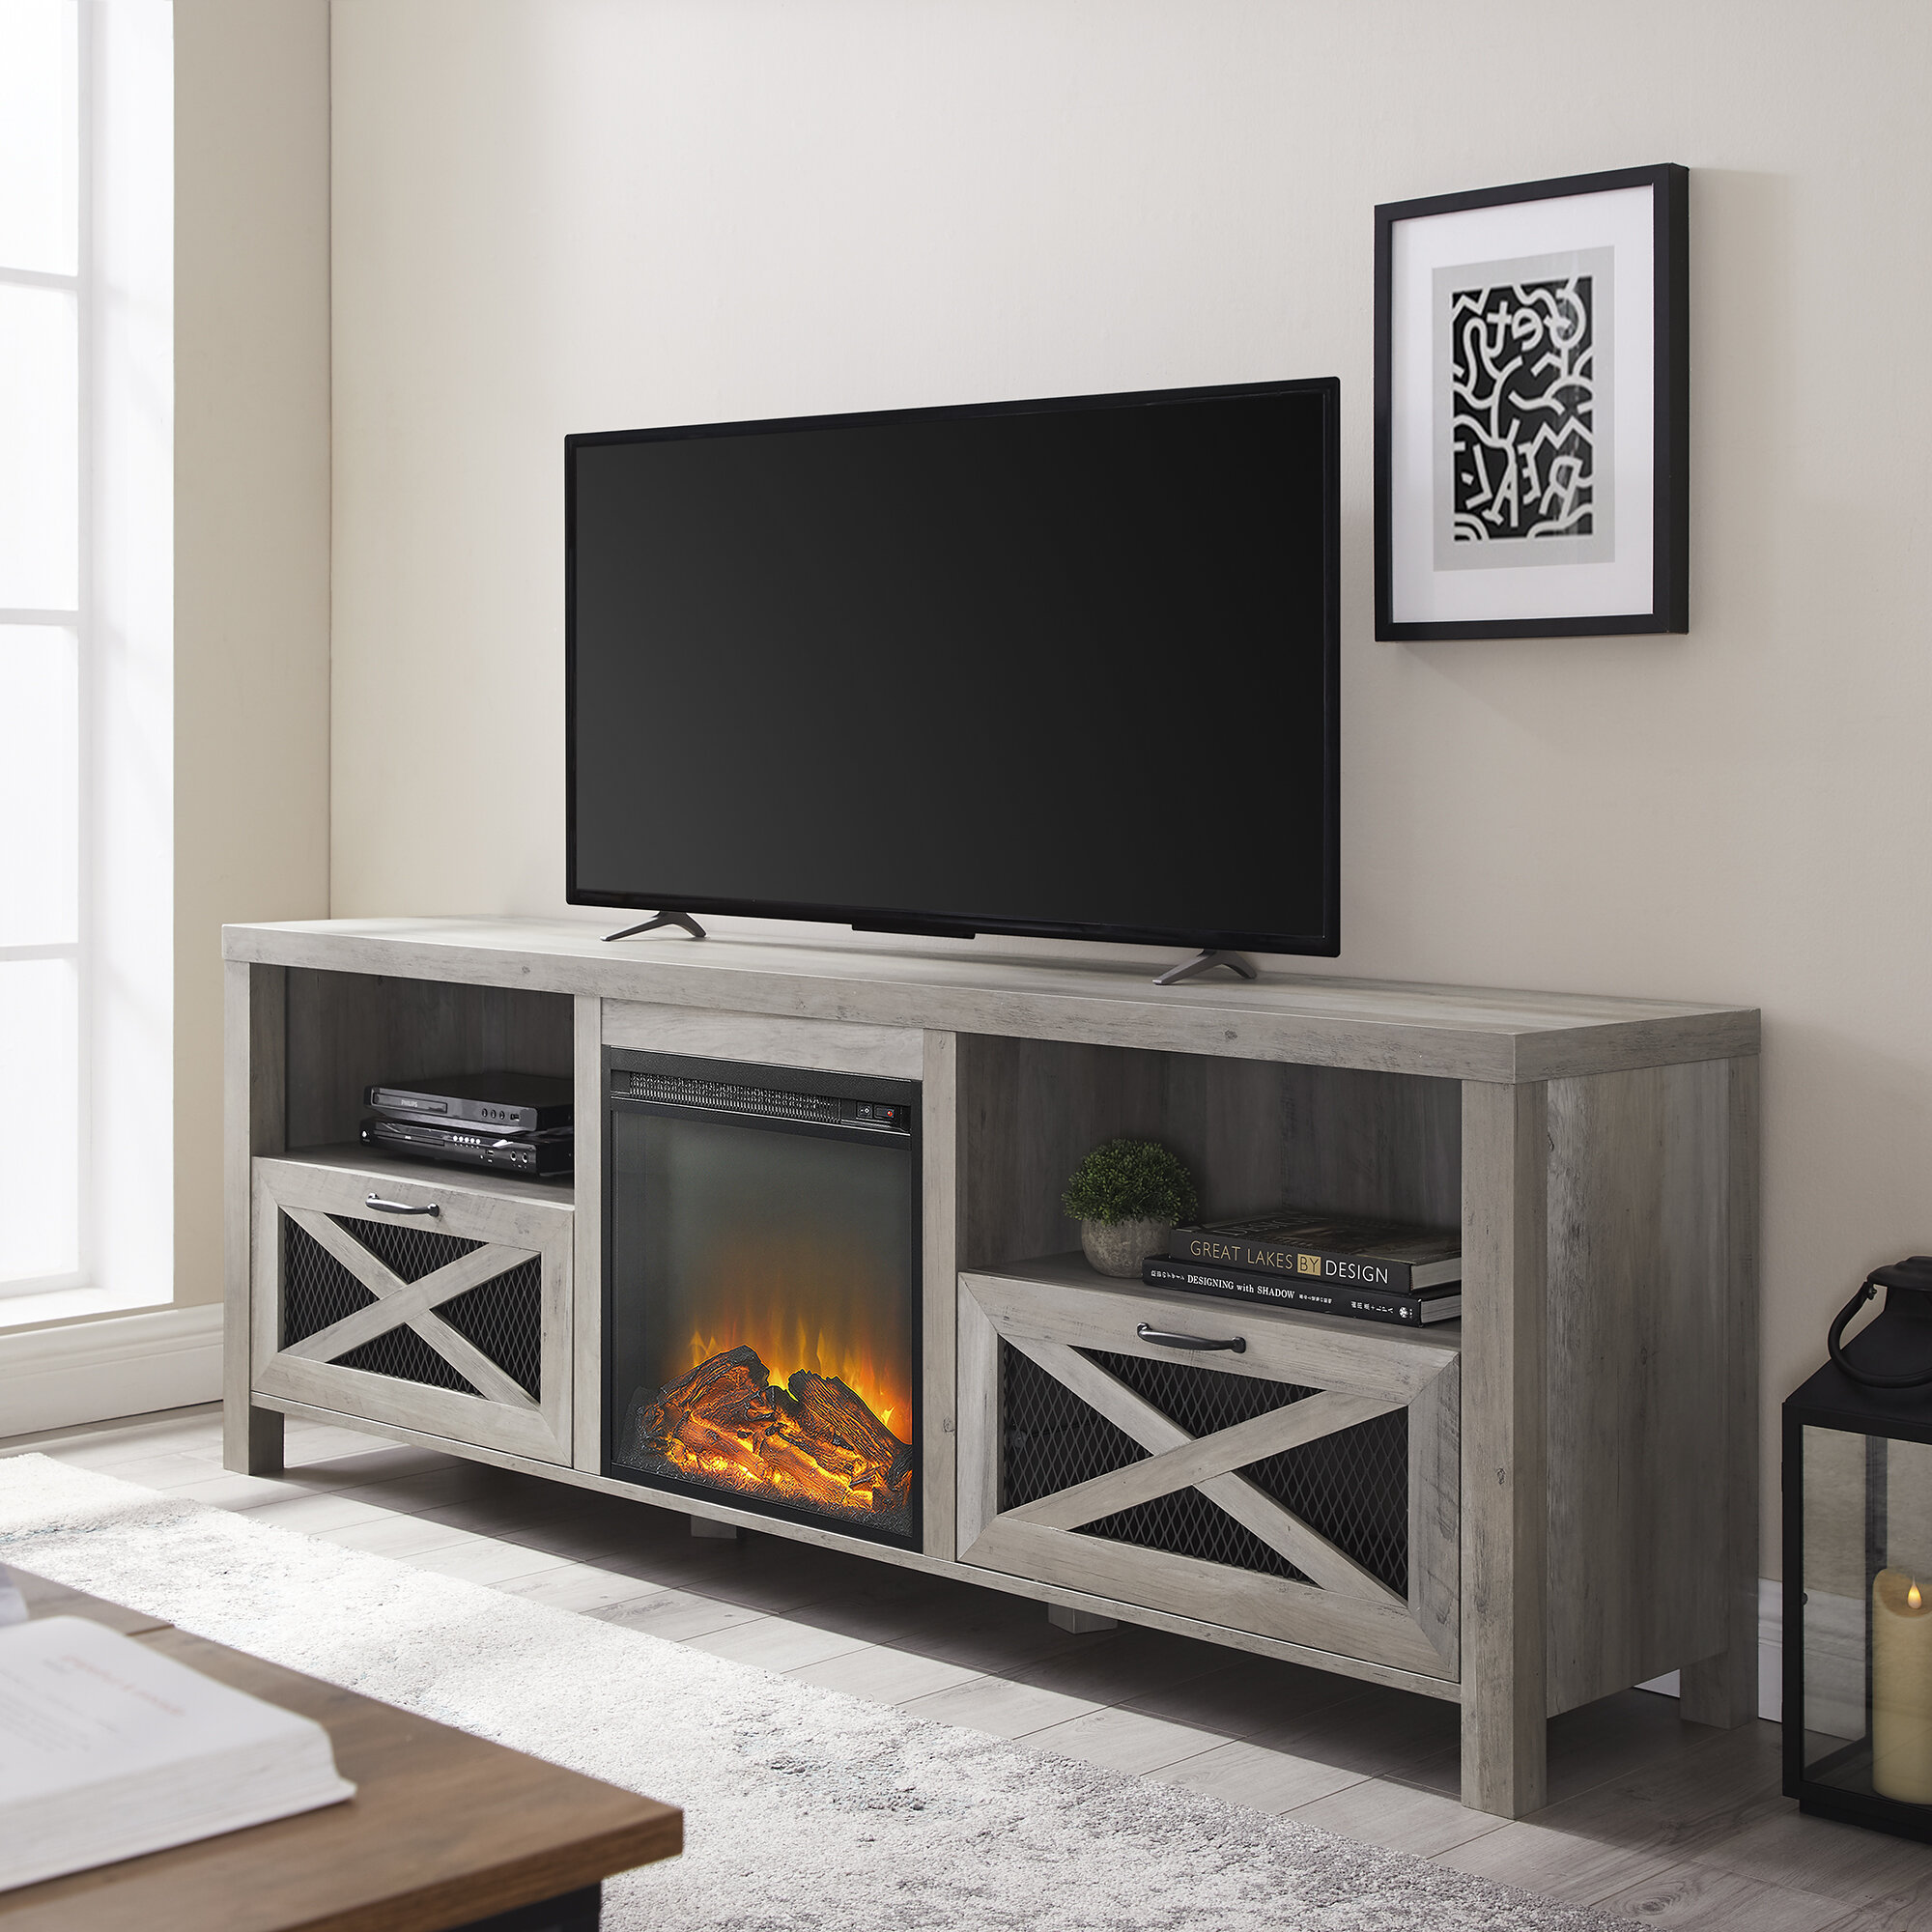 Rooms to Go Electric Fireplace Elegant Tansey Tv Stand for Tvs Up to 70" with Electric Fireplace